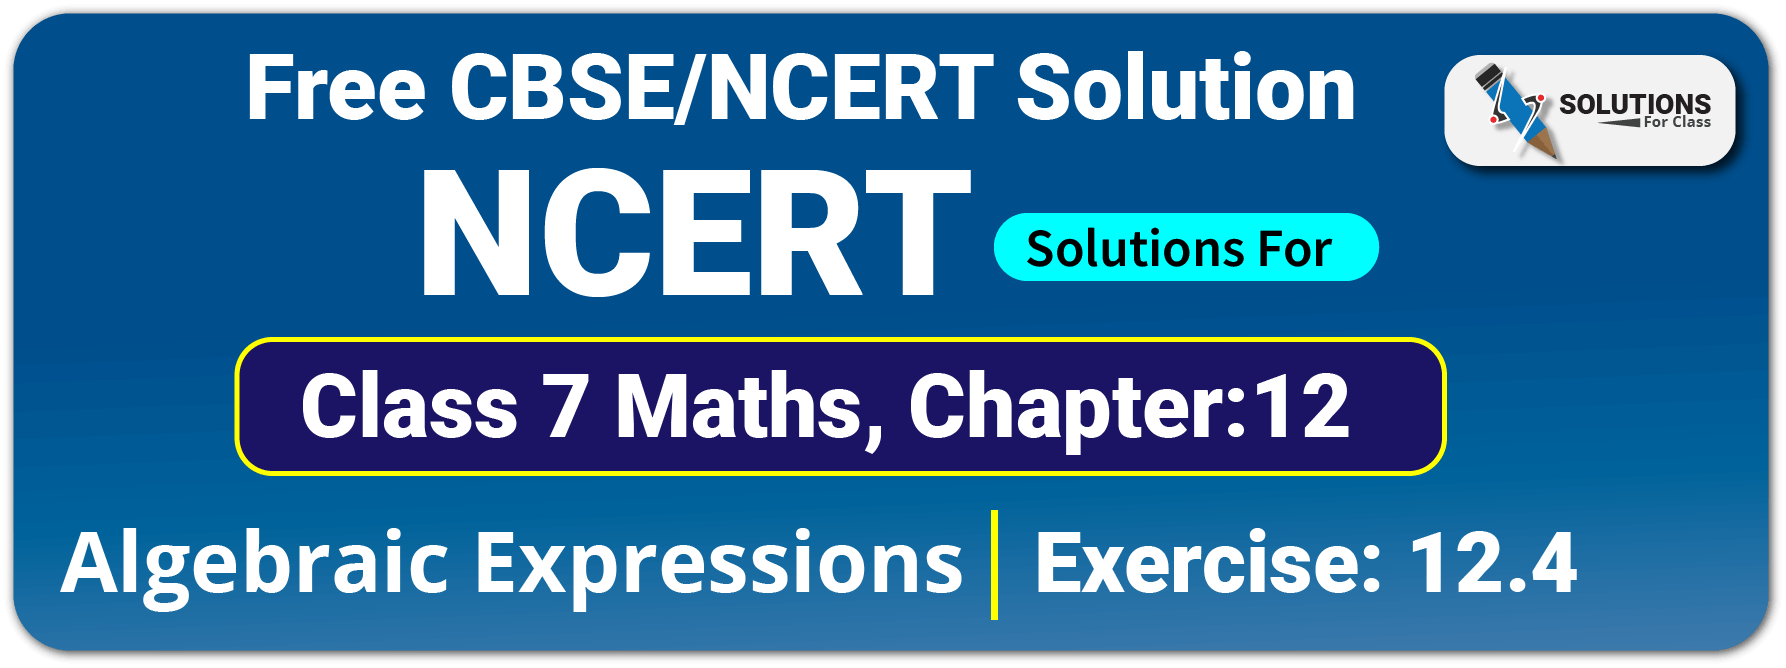 NCERT Solutions For Class 7 Maths Chapter 12 Algebraic Expressions Exercise 12.4